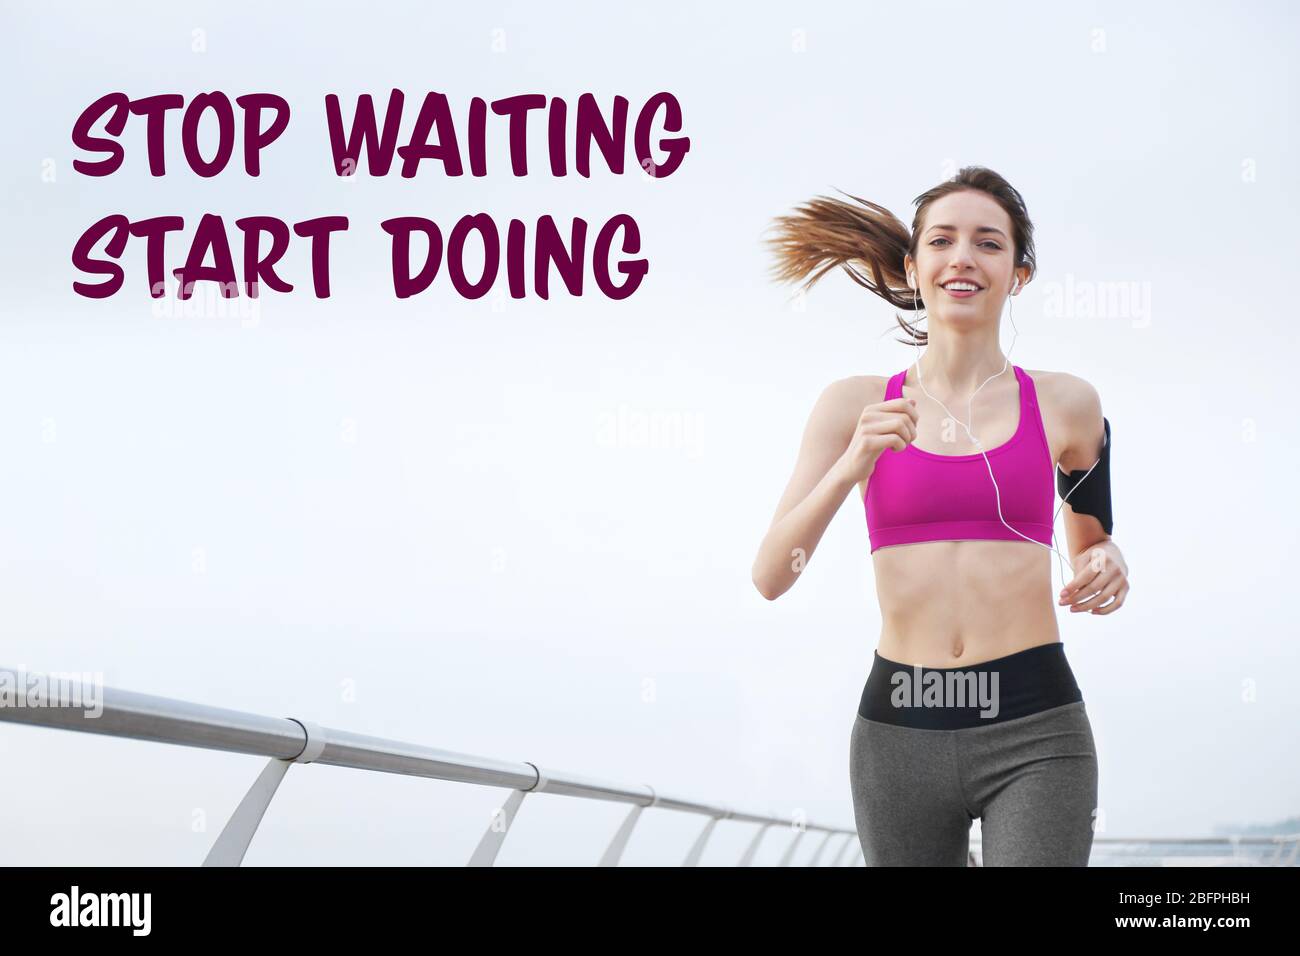 Weight loss motivation concept. Young woman running outdoor. Text ...